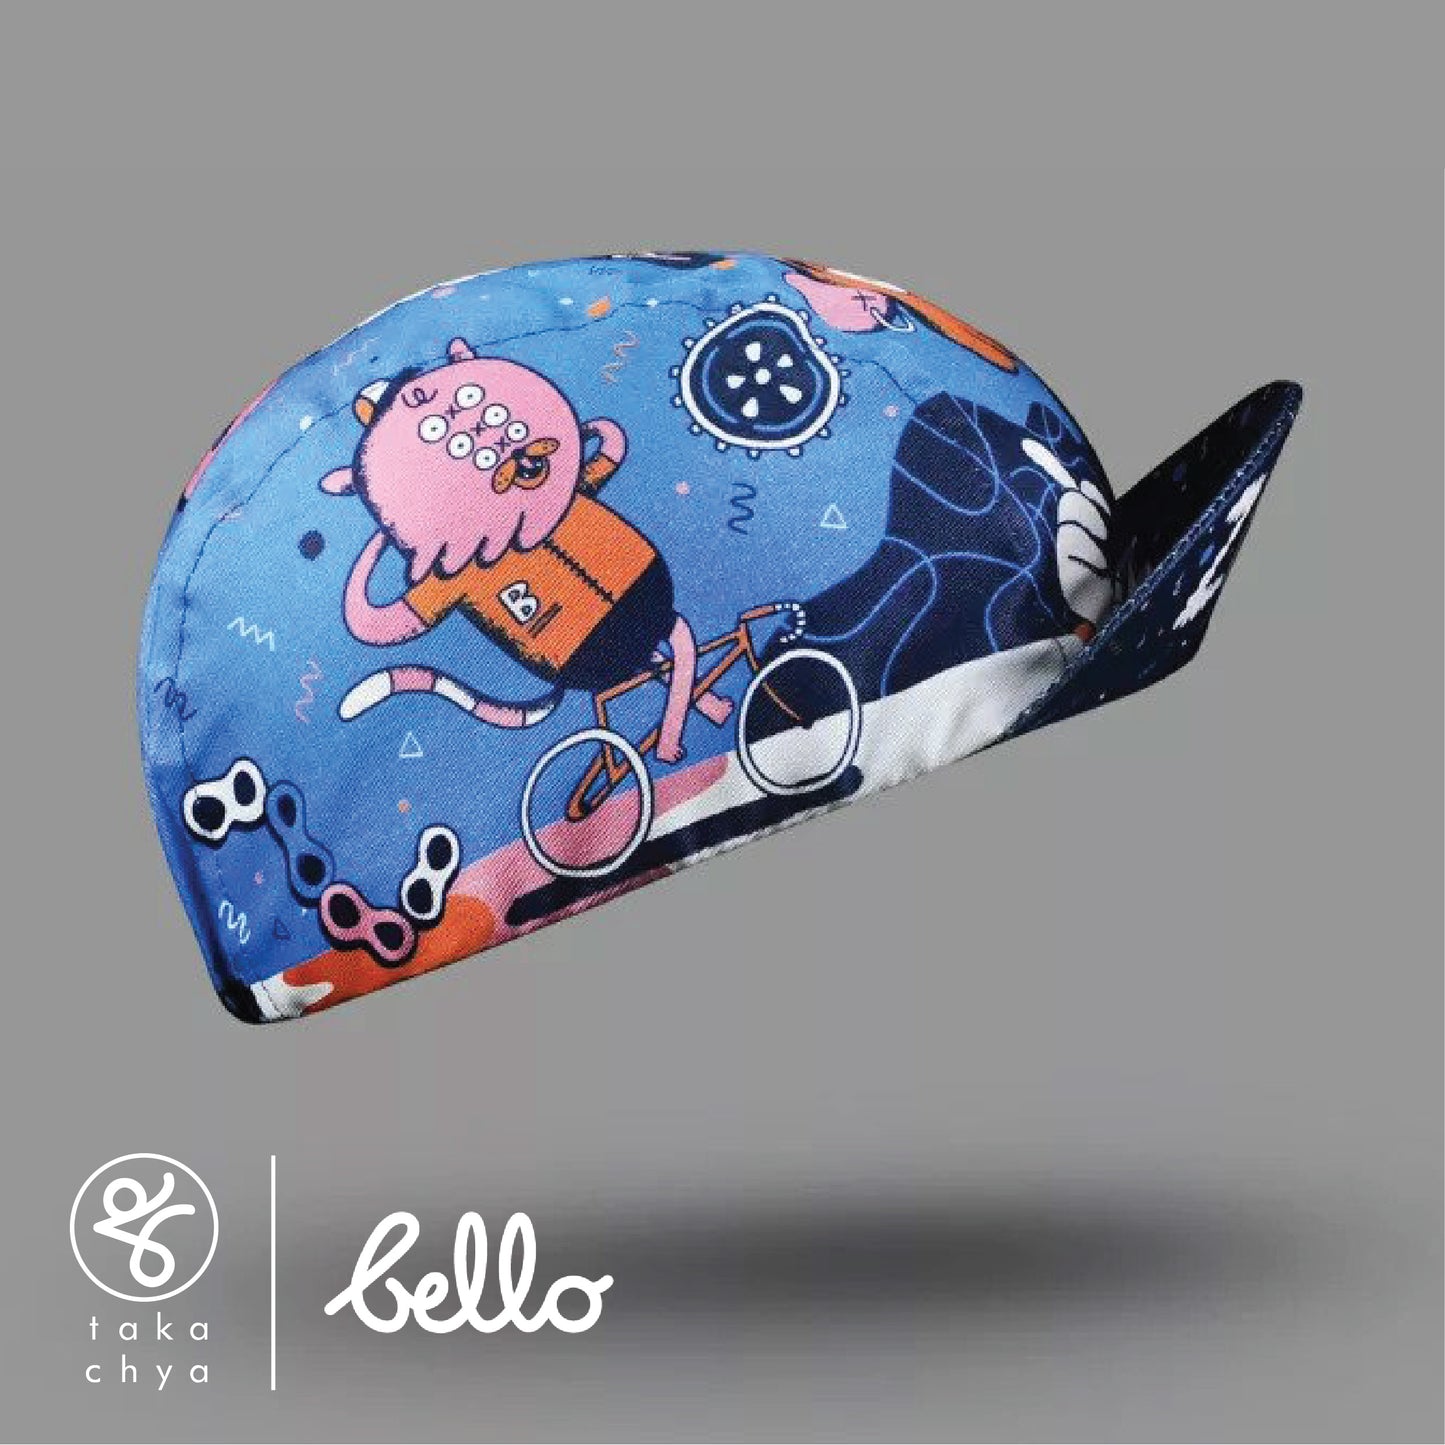 Zooooom! by CLÖ - Bello Cyclist Designer Collaboration Cycling Cap